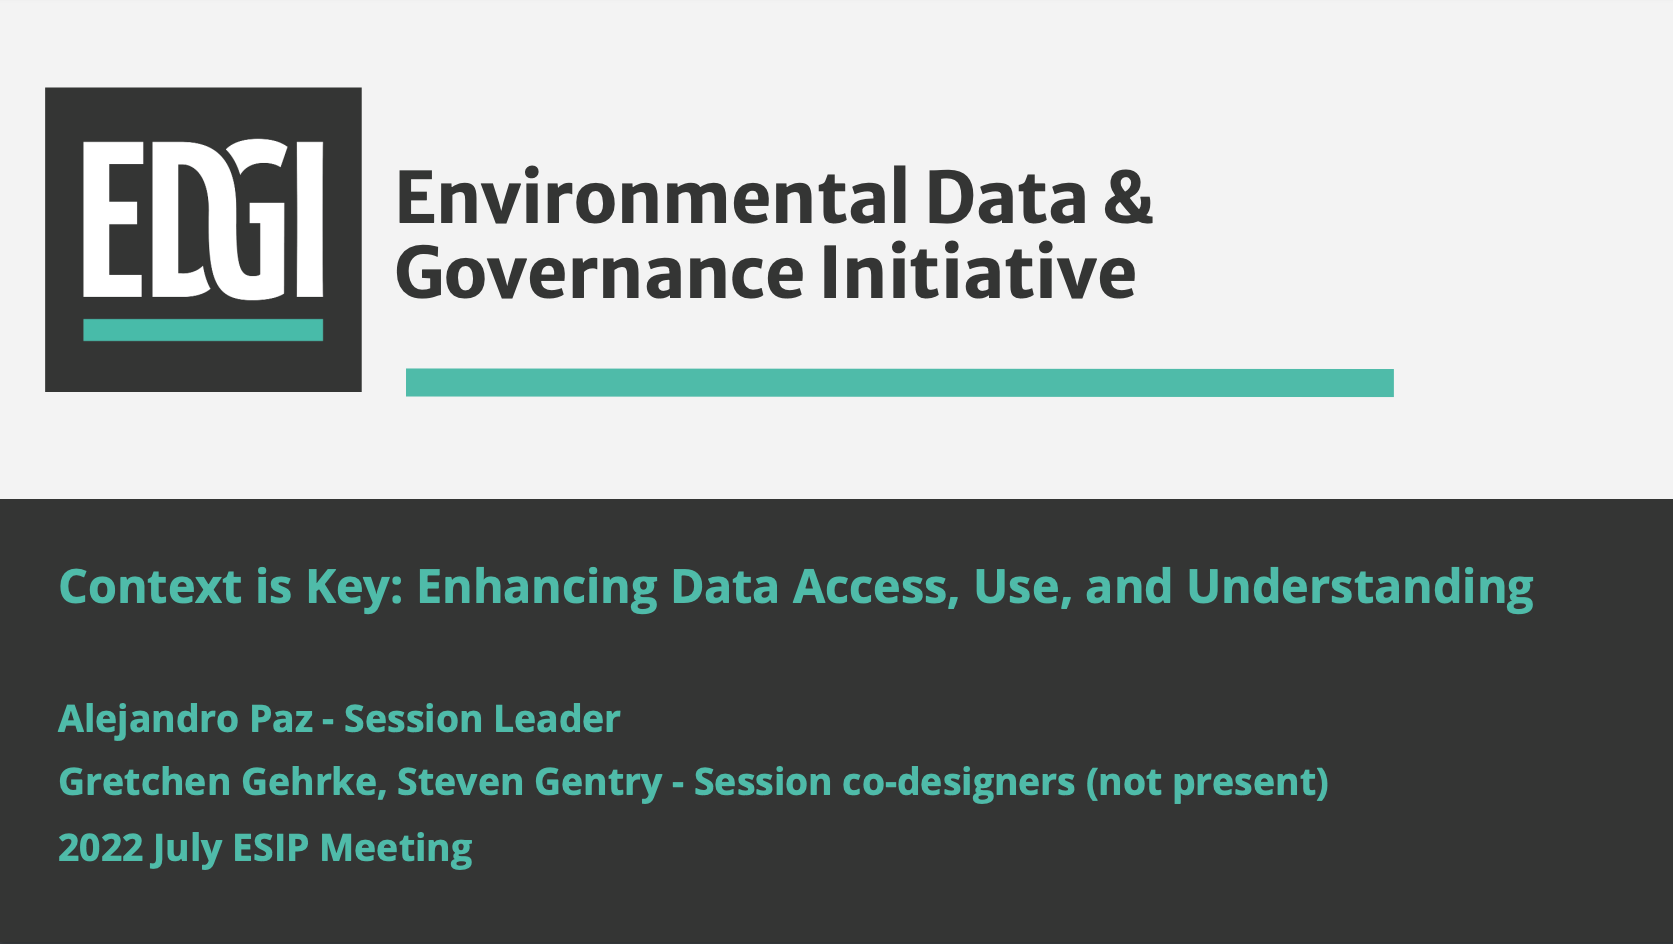 EDGI Presents on Enhancing Data Access, Use, and Understanding at ESIP Meeting